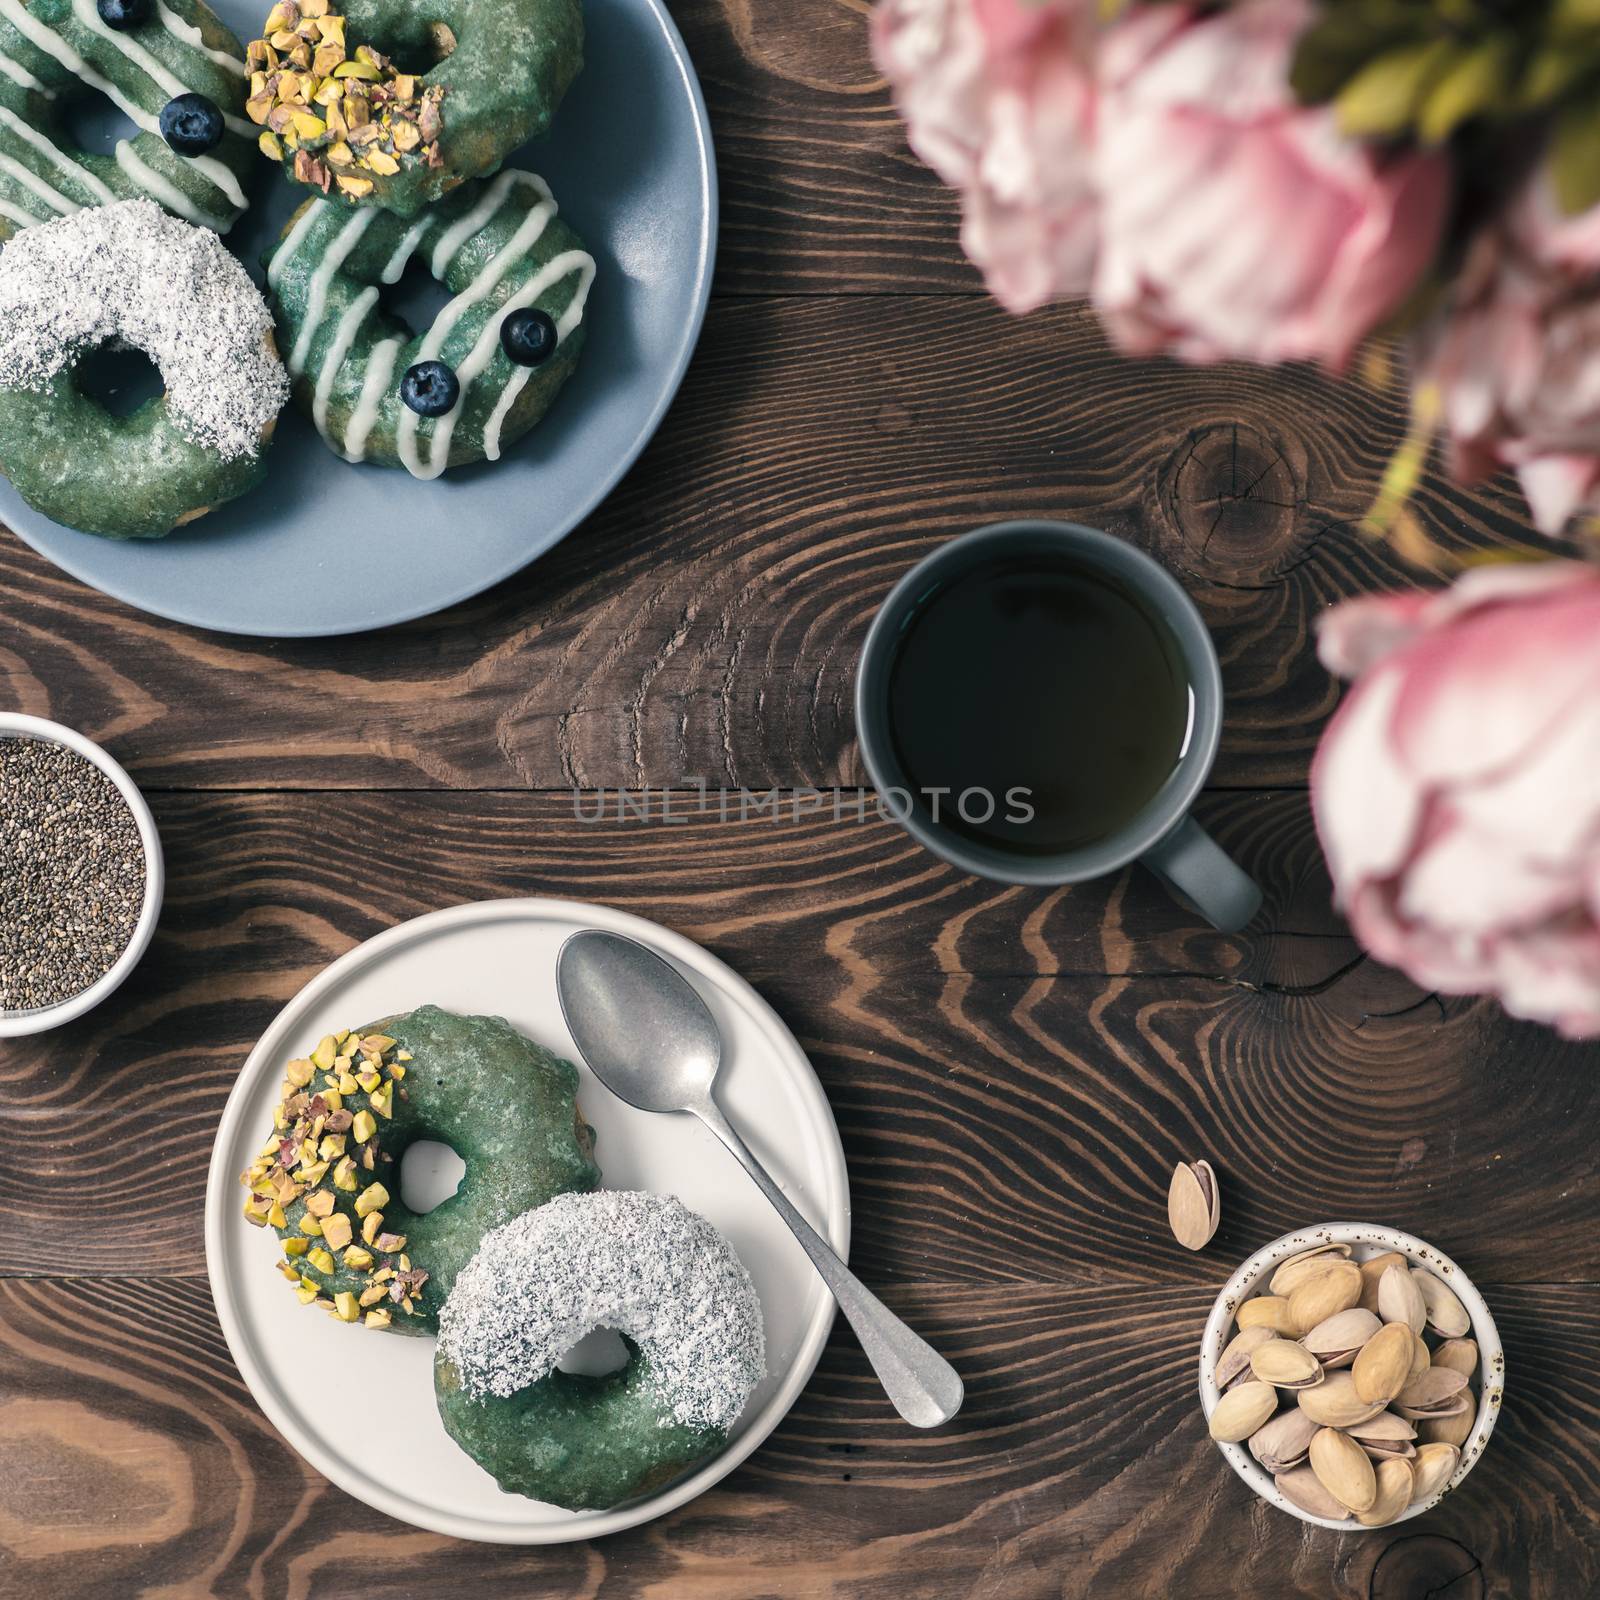 Vegan doughnuts with chia seeds topped with healthy spirulina glaze with pistachio,desiccated coconut and blueberry.Blue green spirulina donuts, herbal tea cup on brown wooden table.Top view,flat lay